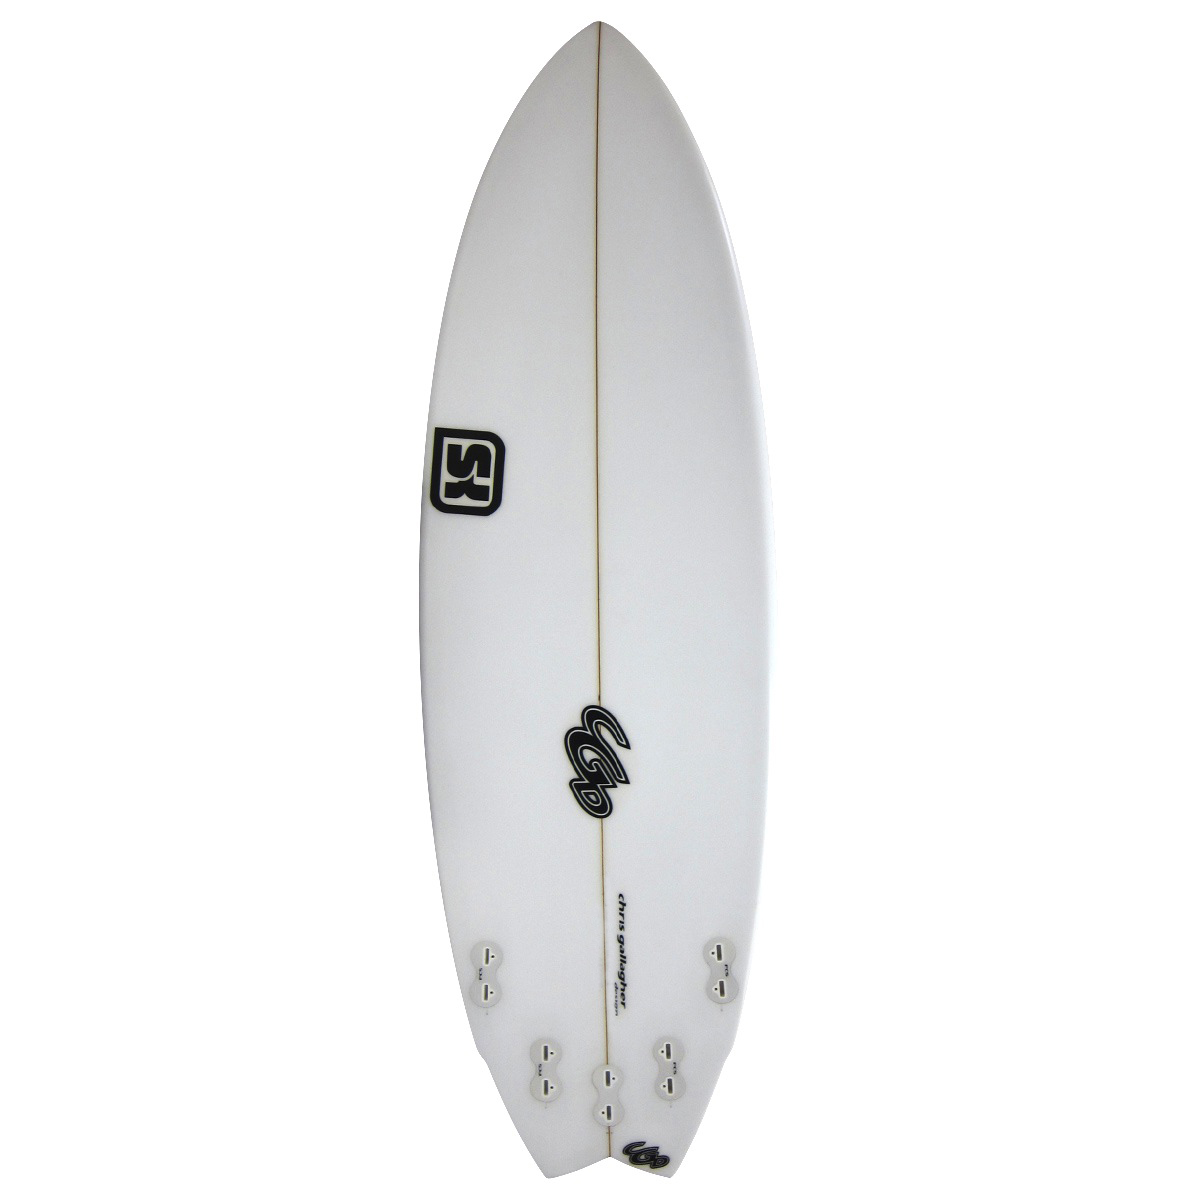 SK SURFBOARDS / SCRAPPER 5`6 Shaped By Chris Gallagher